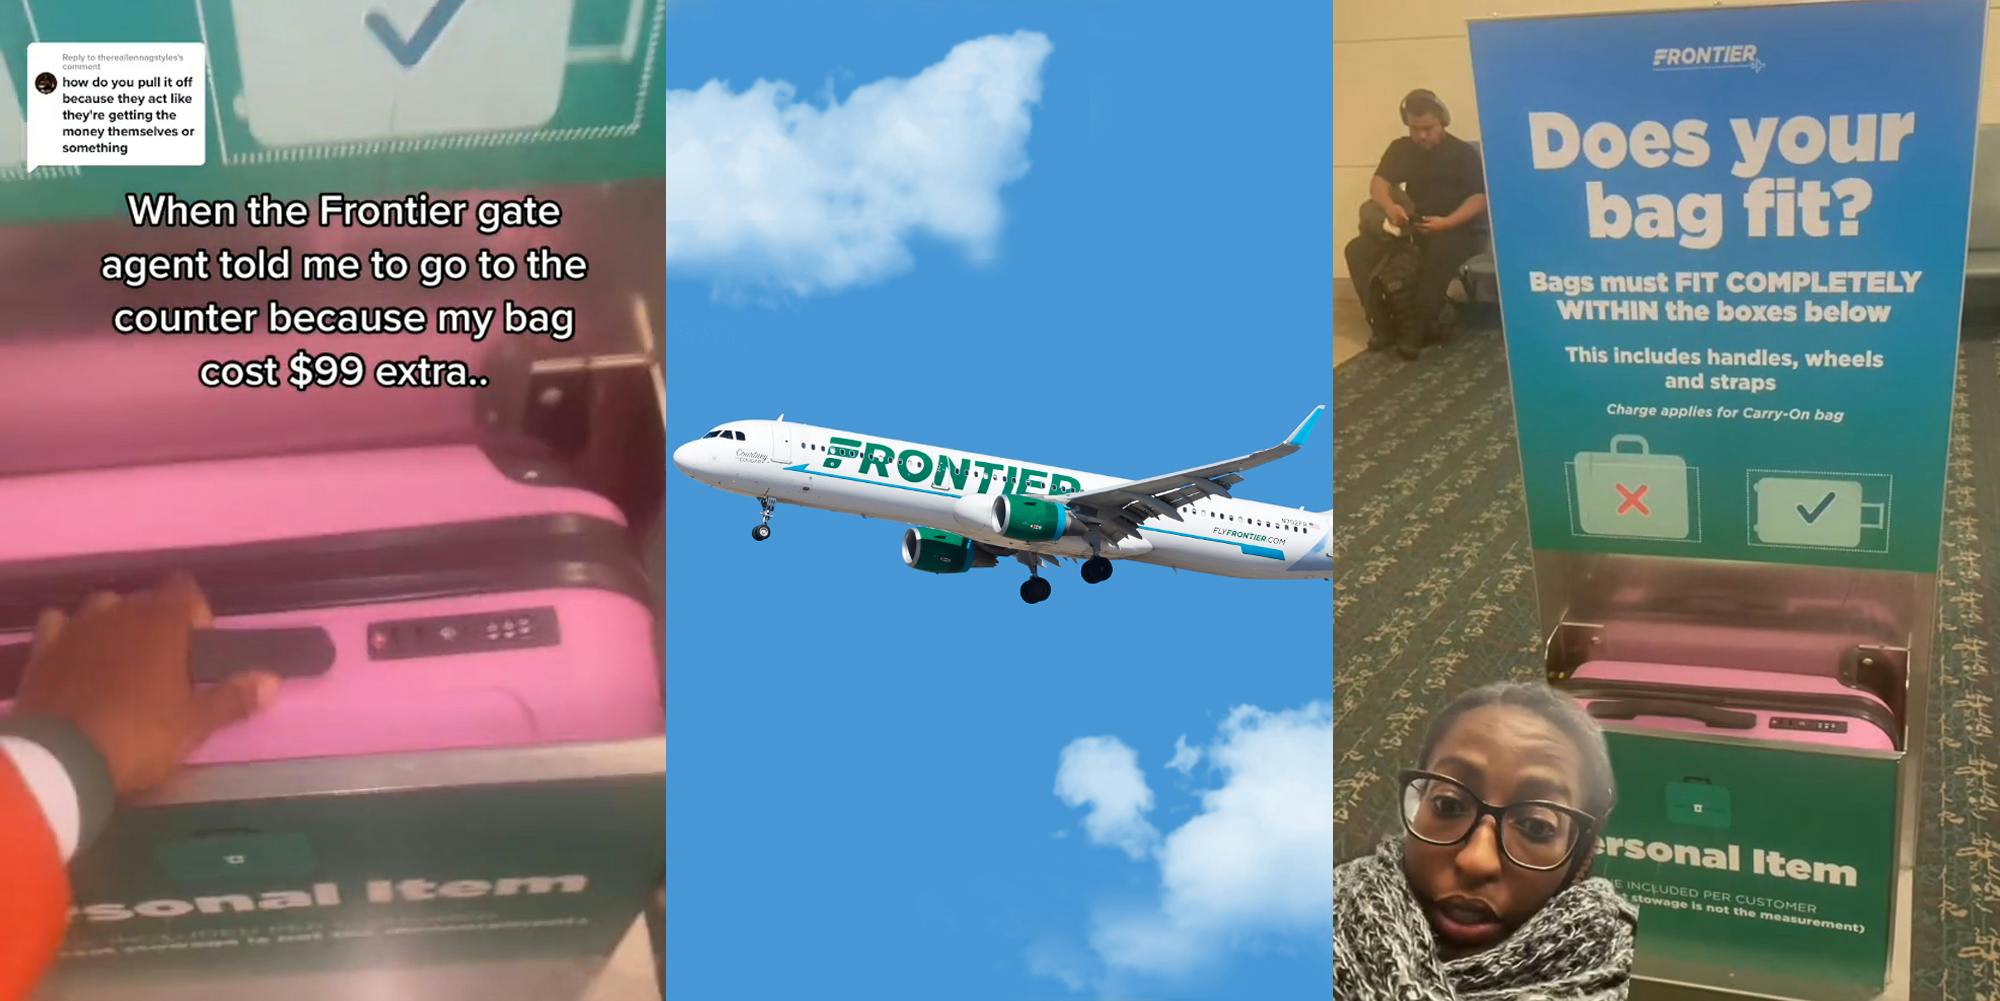 woman putting personal bag in Frontier Does Your Bag Fit box with caption "how do you pull it off because they act like they're getting the money themselves or something When the Frontier gate agent told me to go to the counter because my bag cost $99 extra.." (l) Frontier plane with branding in blue sky with clouds (c) woman greenscreen TikTok over image of Frontier airlines Does Your Bag Fit box (r)